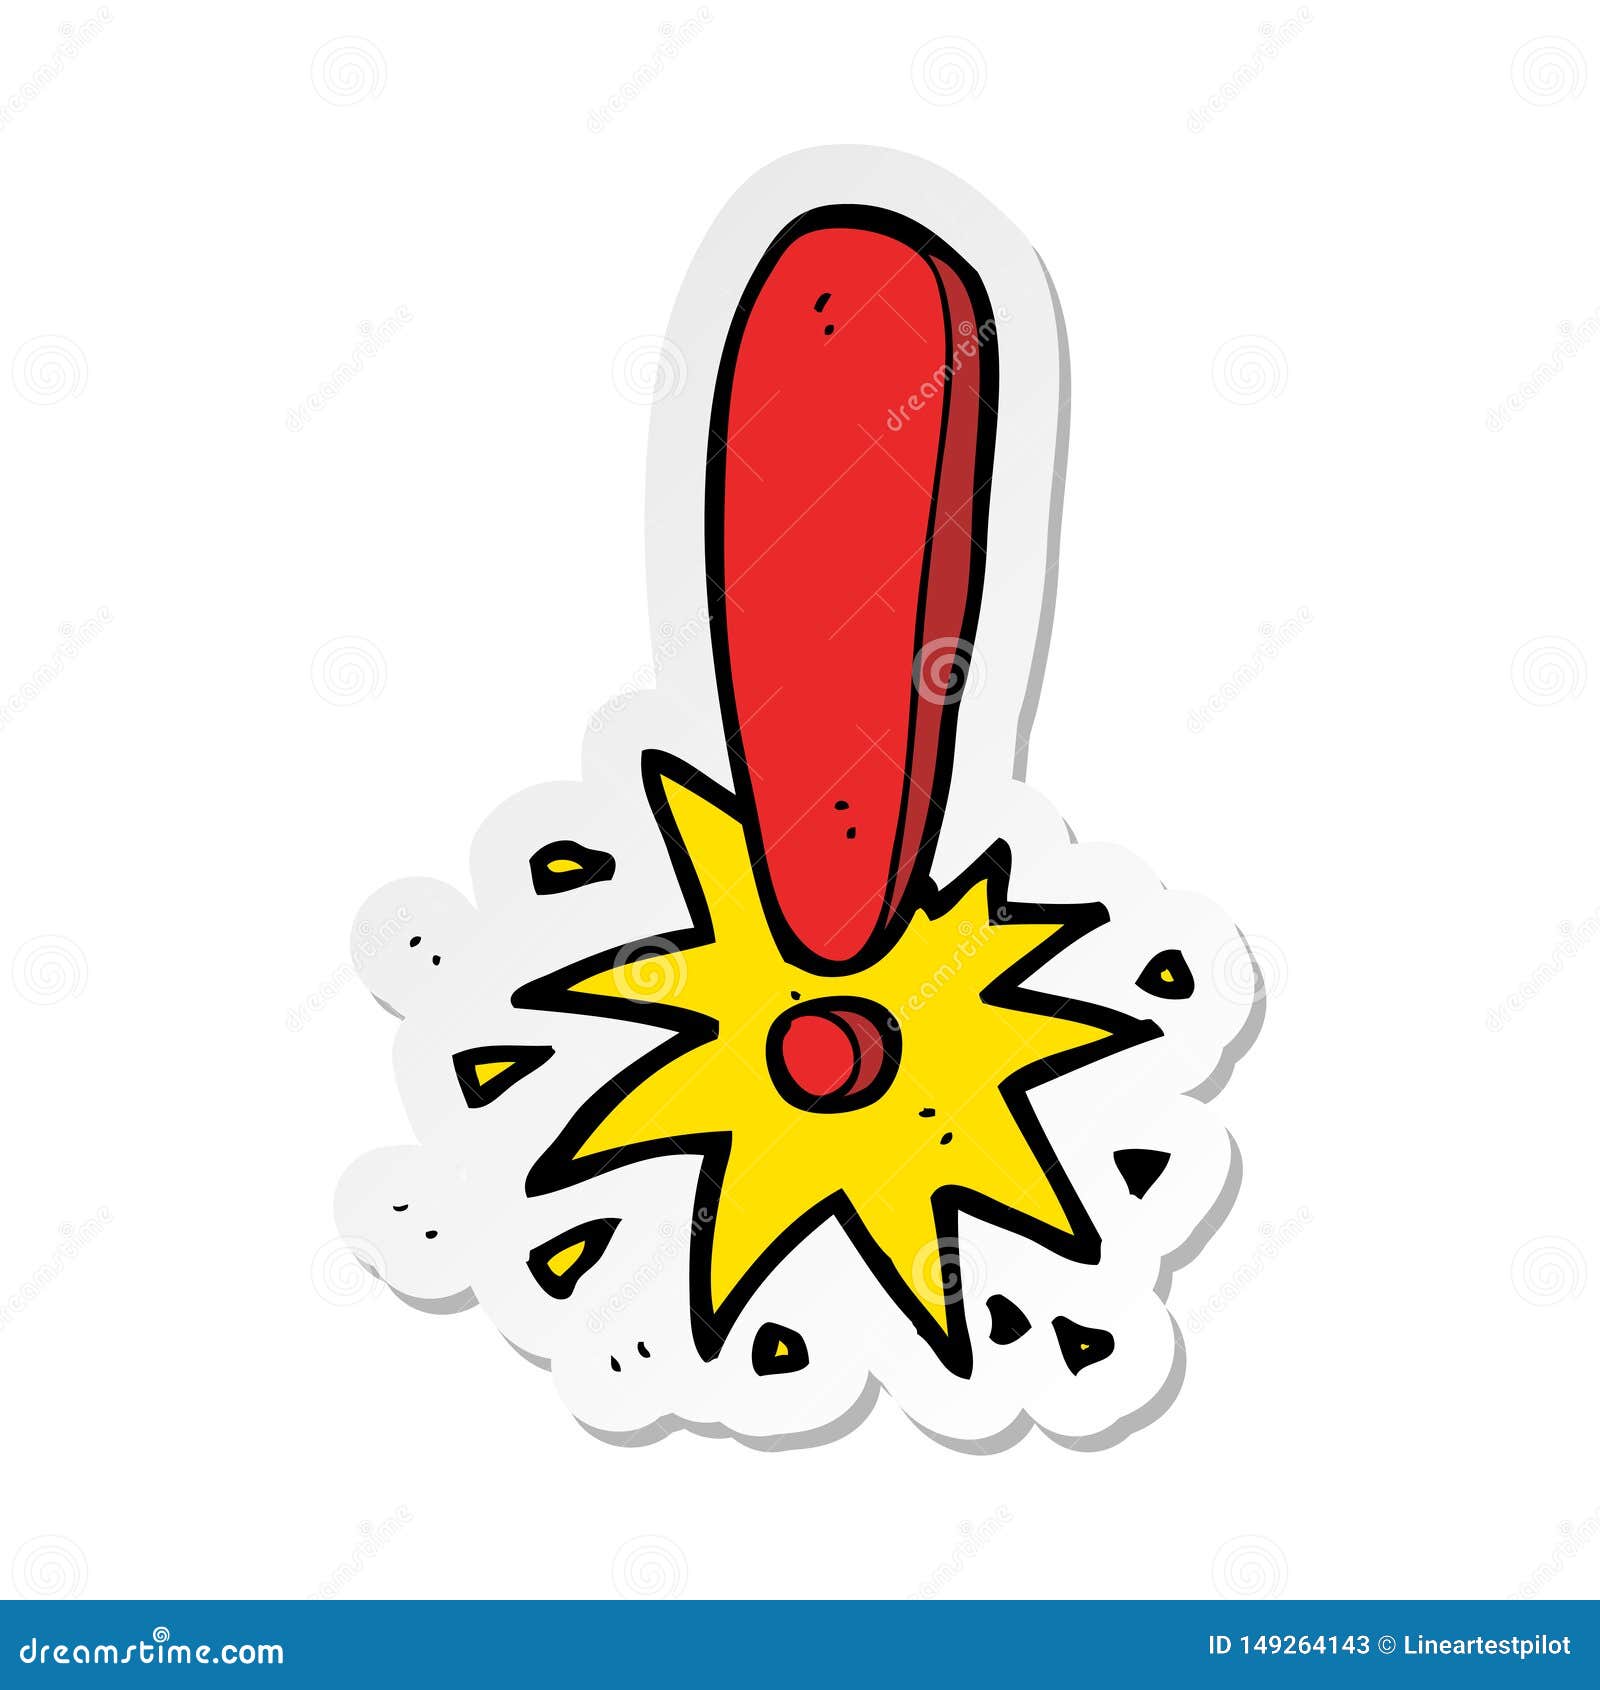 Sticker of a Cartoon Exclamation Mark Stock Vector - Illustration of ...